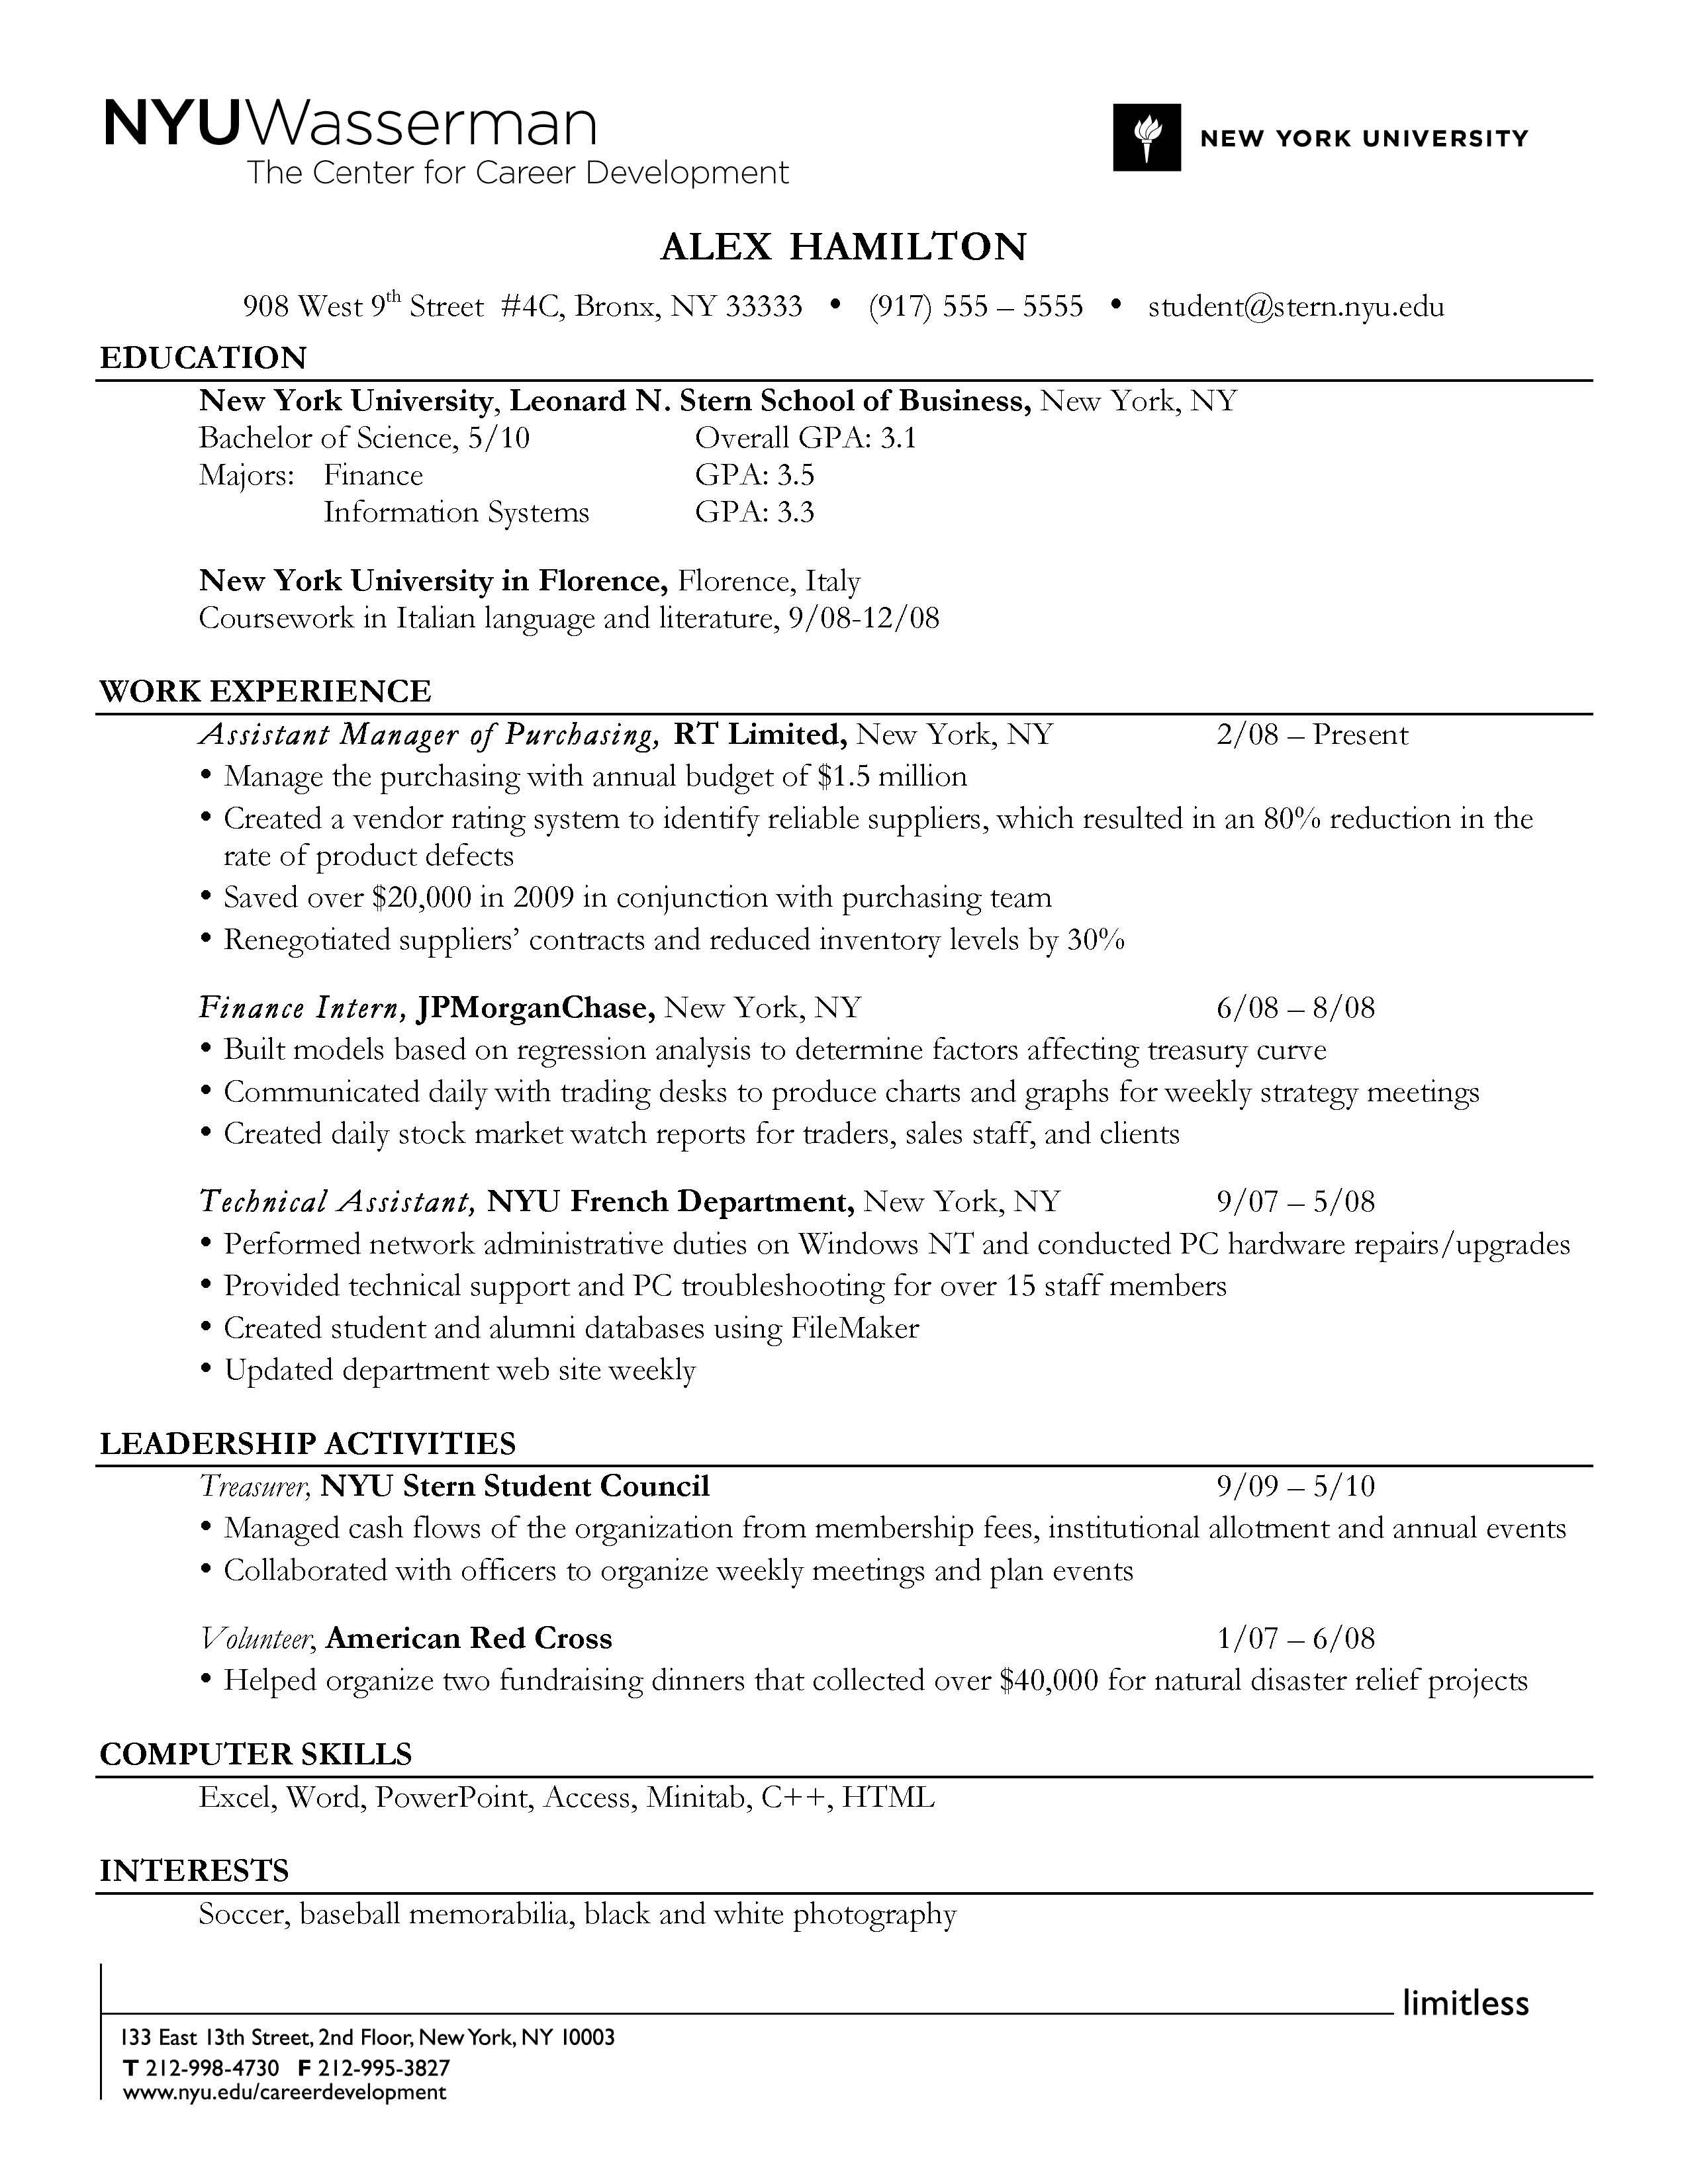 Resume Format Highlighting Experience 